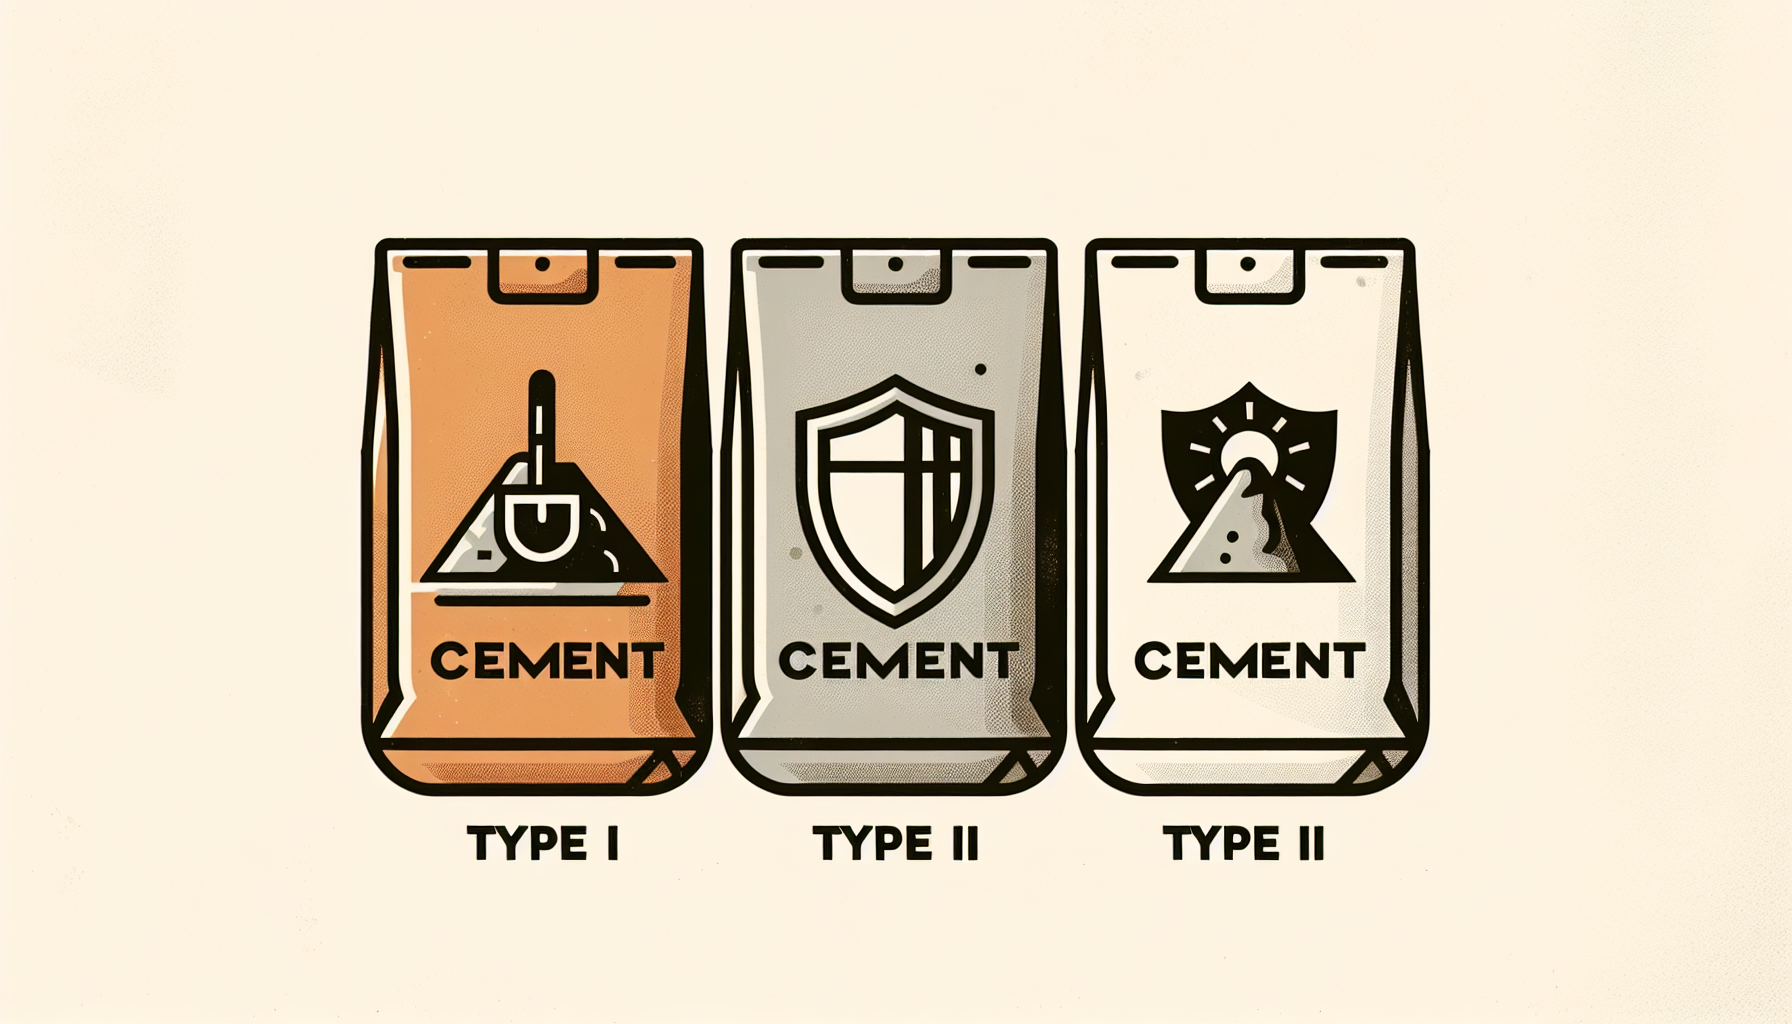 Various types of Portland cement displayed in a row